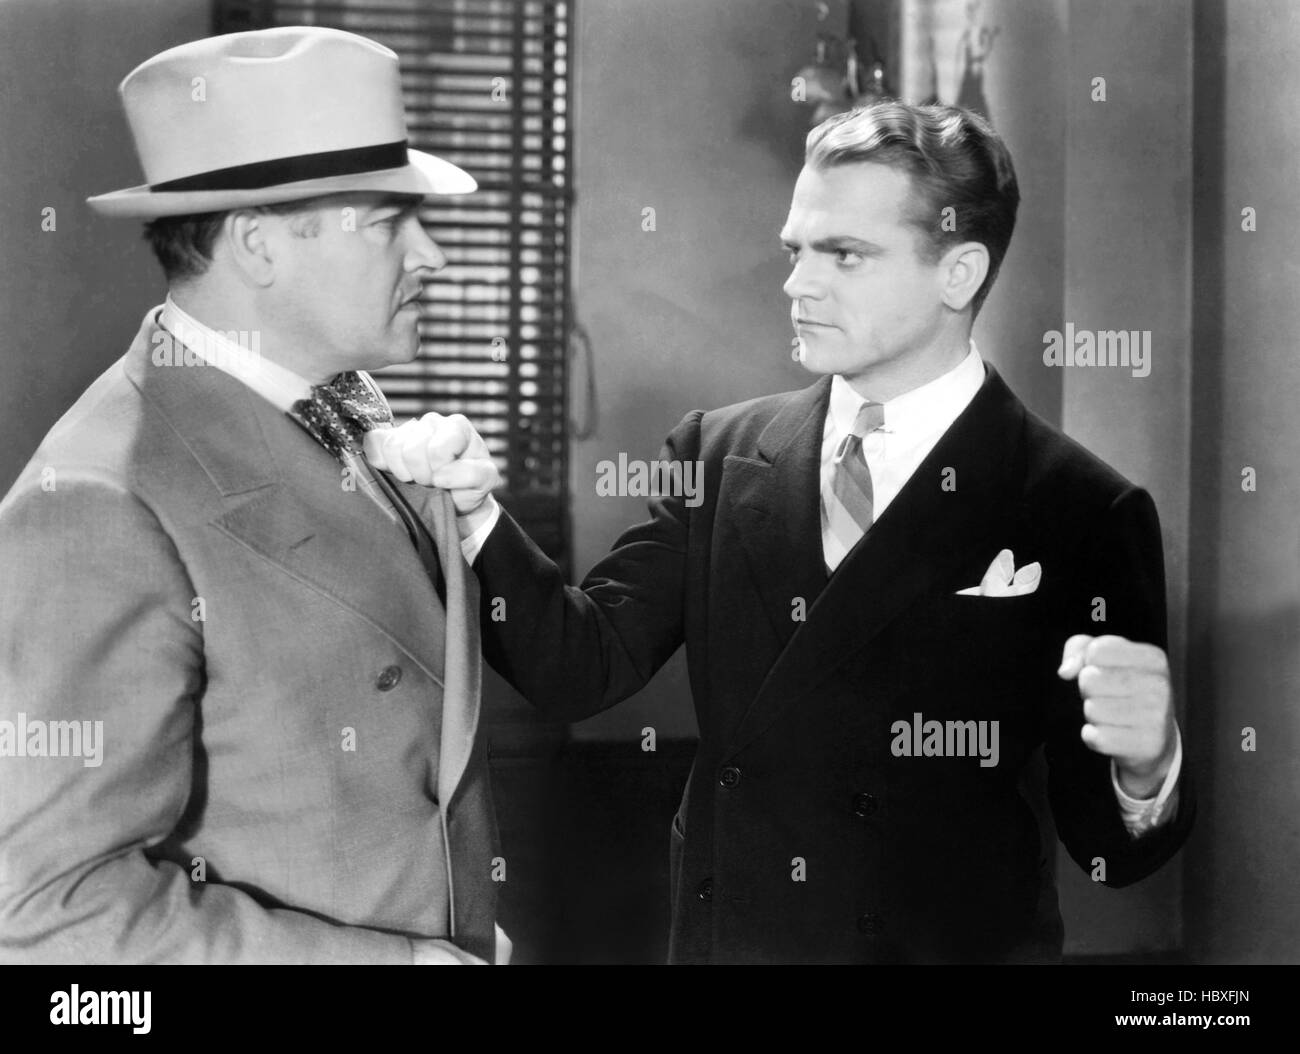 G-MEN, from left: Edwim Maxwell, James Cagney, 1935 Stock Photo - Alamy